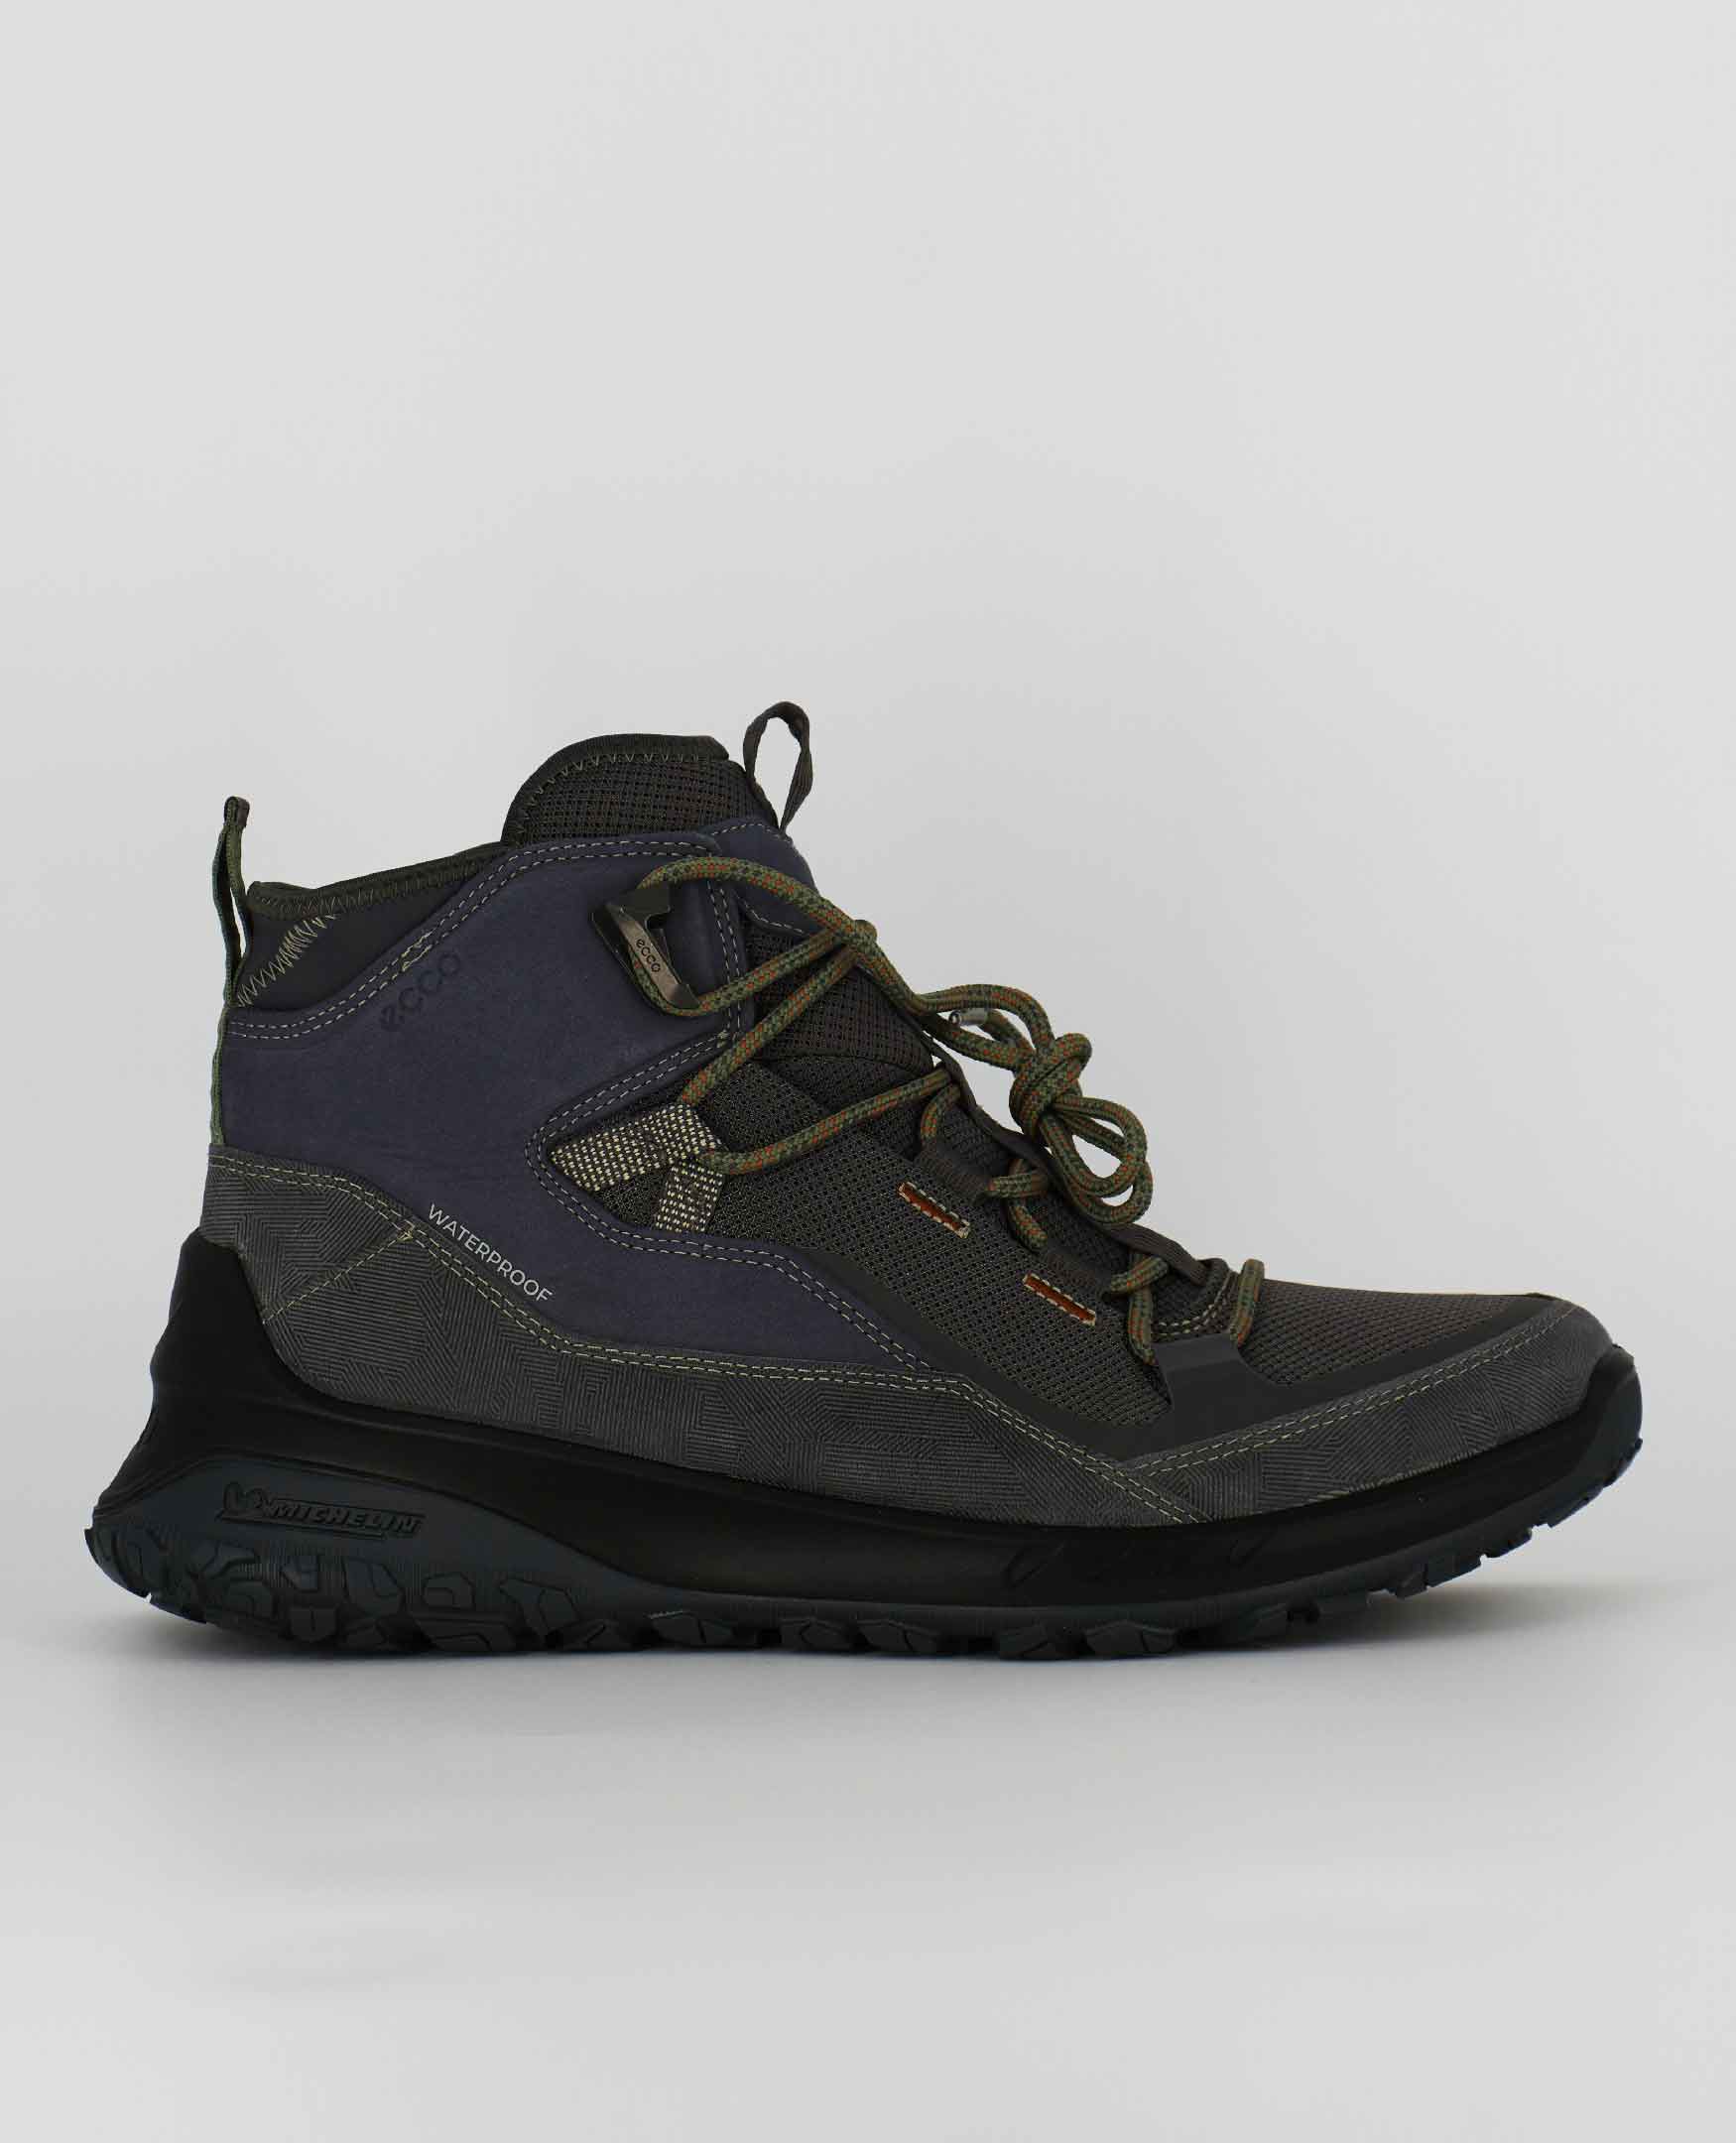 A side view of the Ecco ULT-TRN M, in Grey.